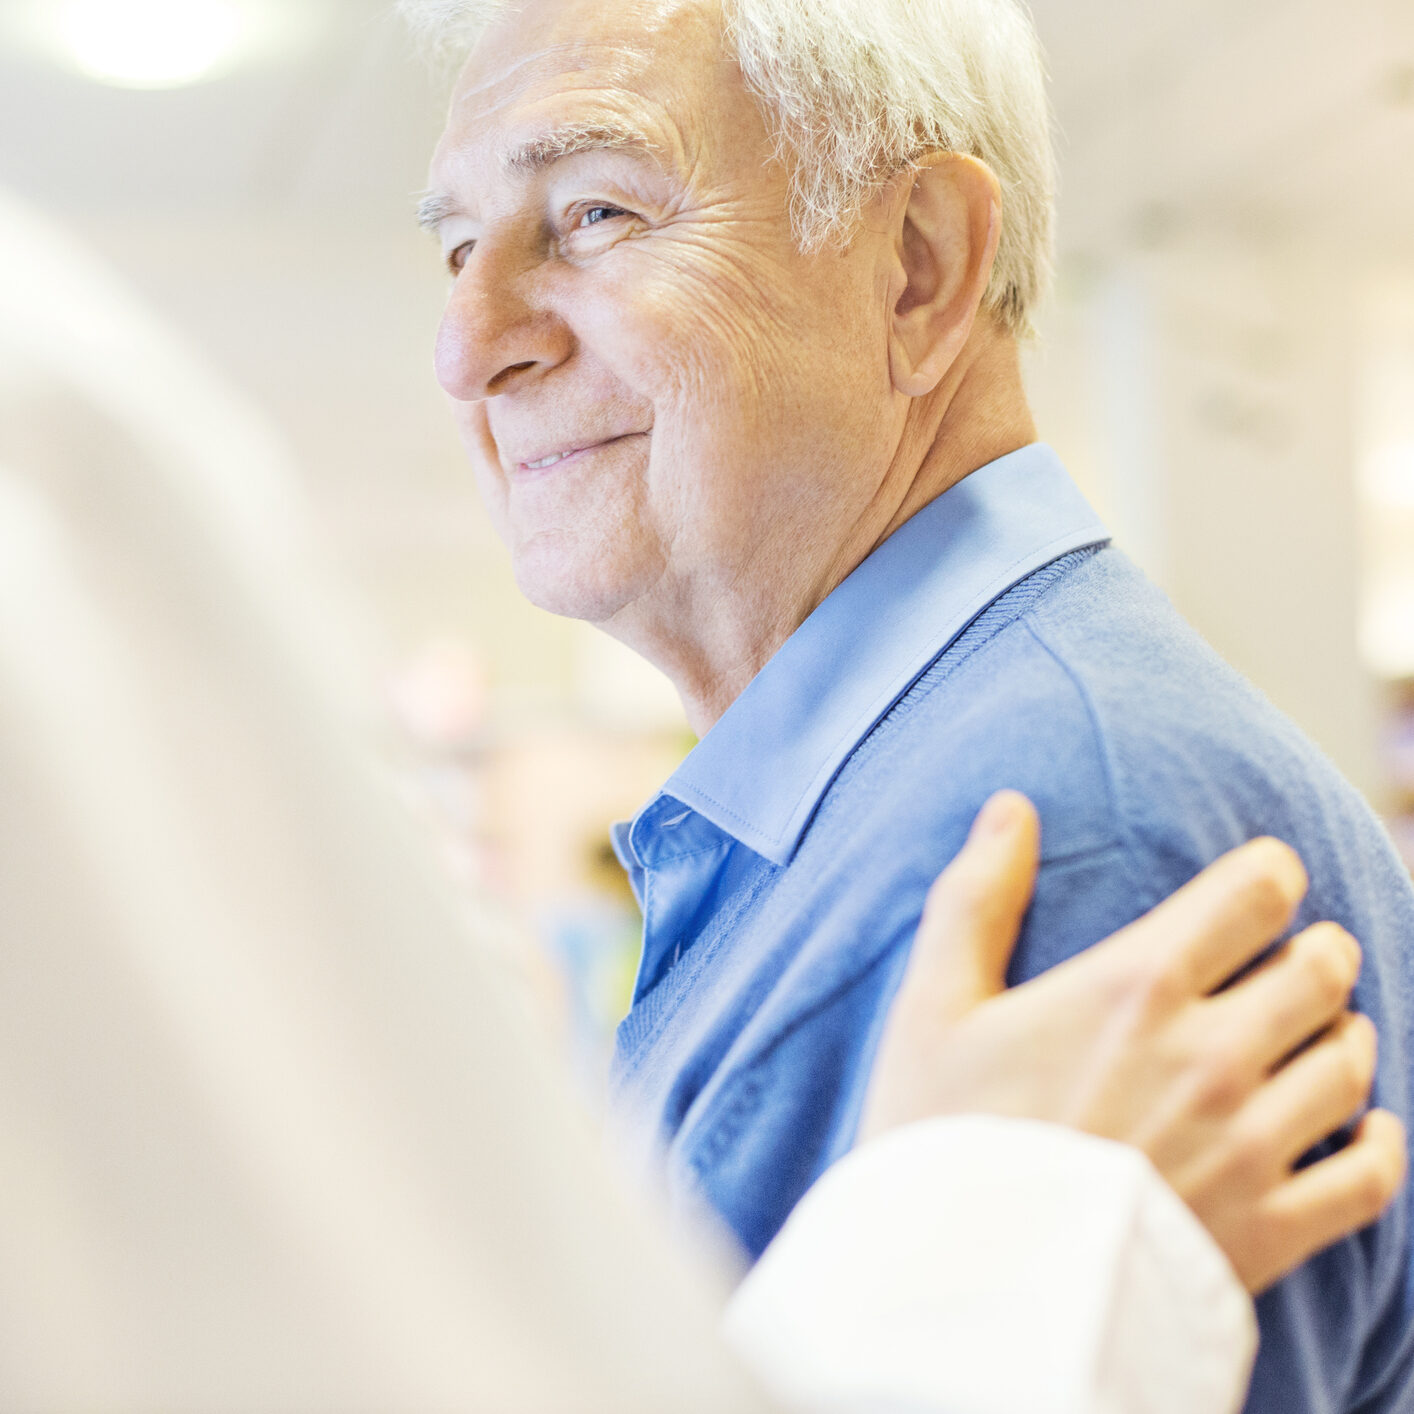 Cropped image of female pharmacist consoling senior man in store. Smiling male customer is looking at chemist. They are at brightly lit pharmacy.